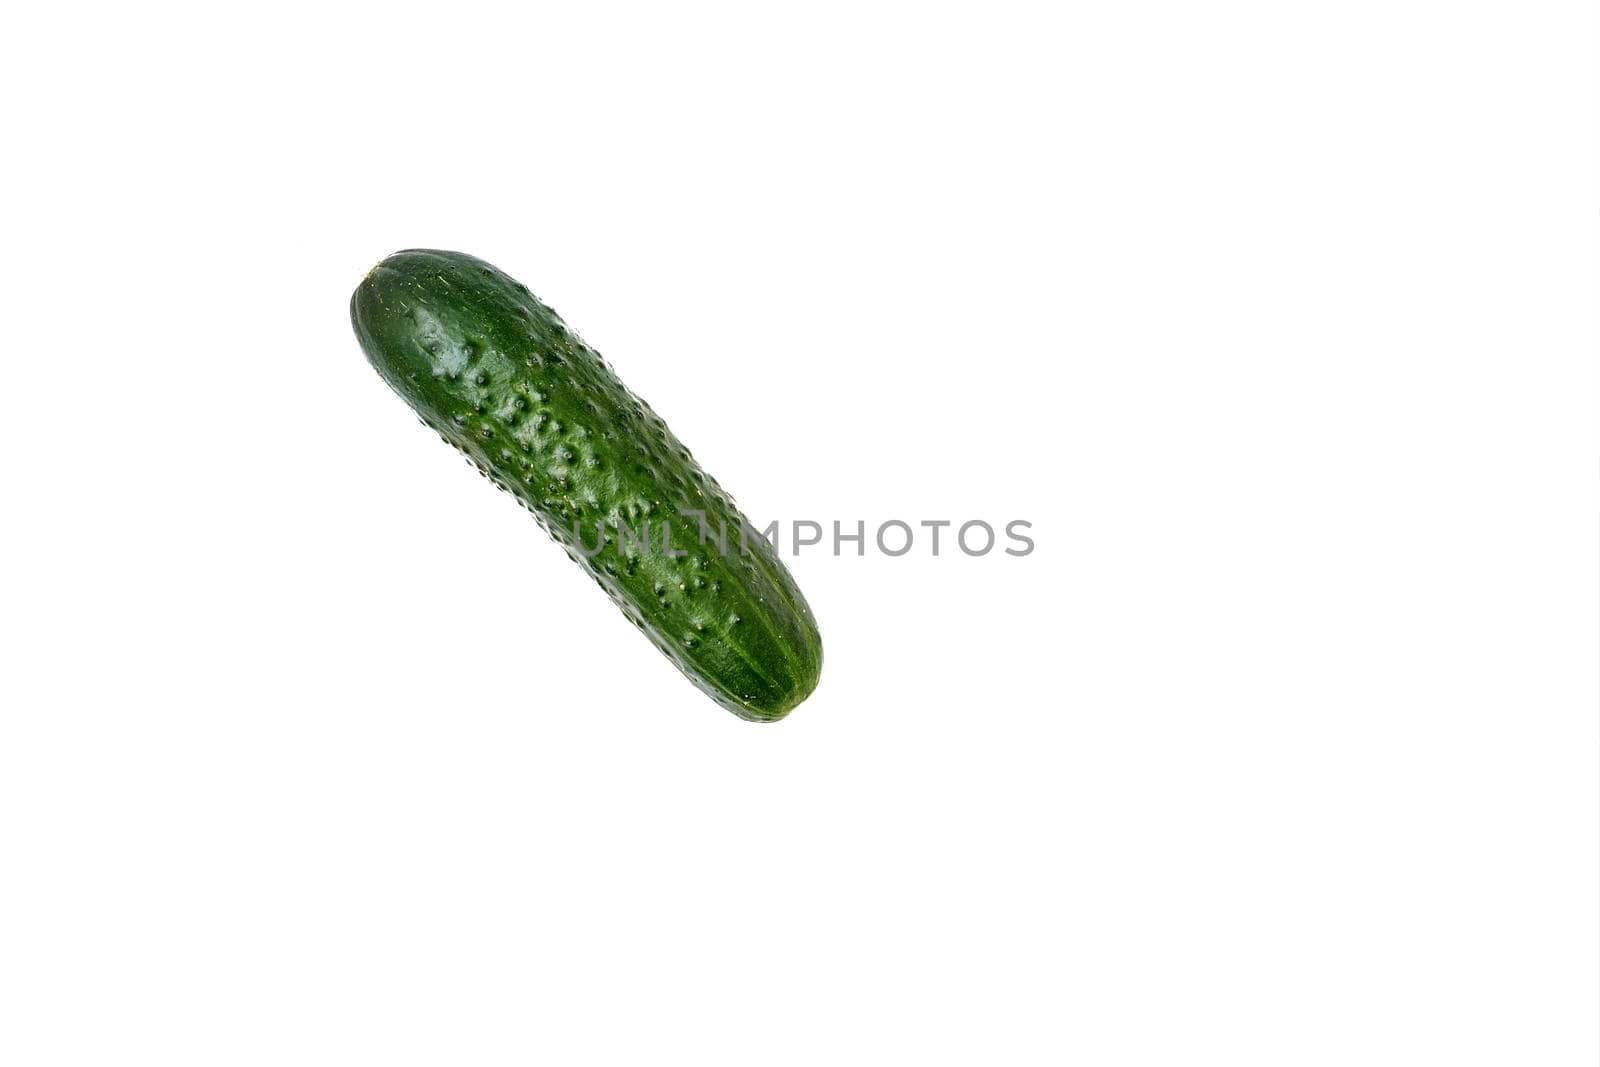 a long, green-skinned fruit with watery flesh, usually eaten raw in salads or pickled.